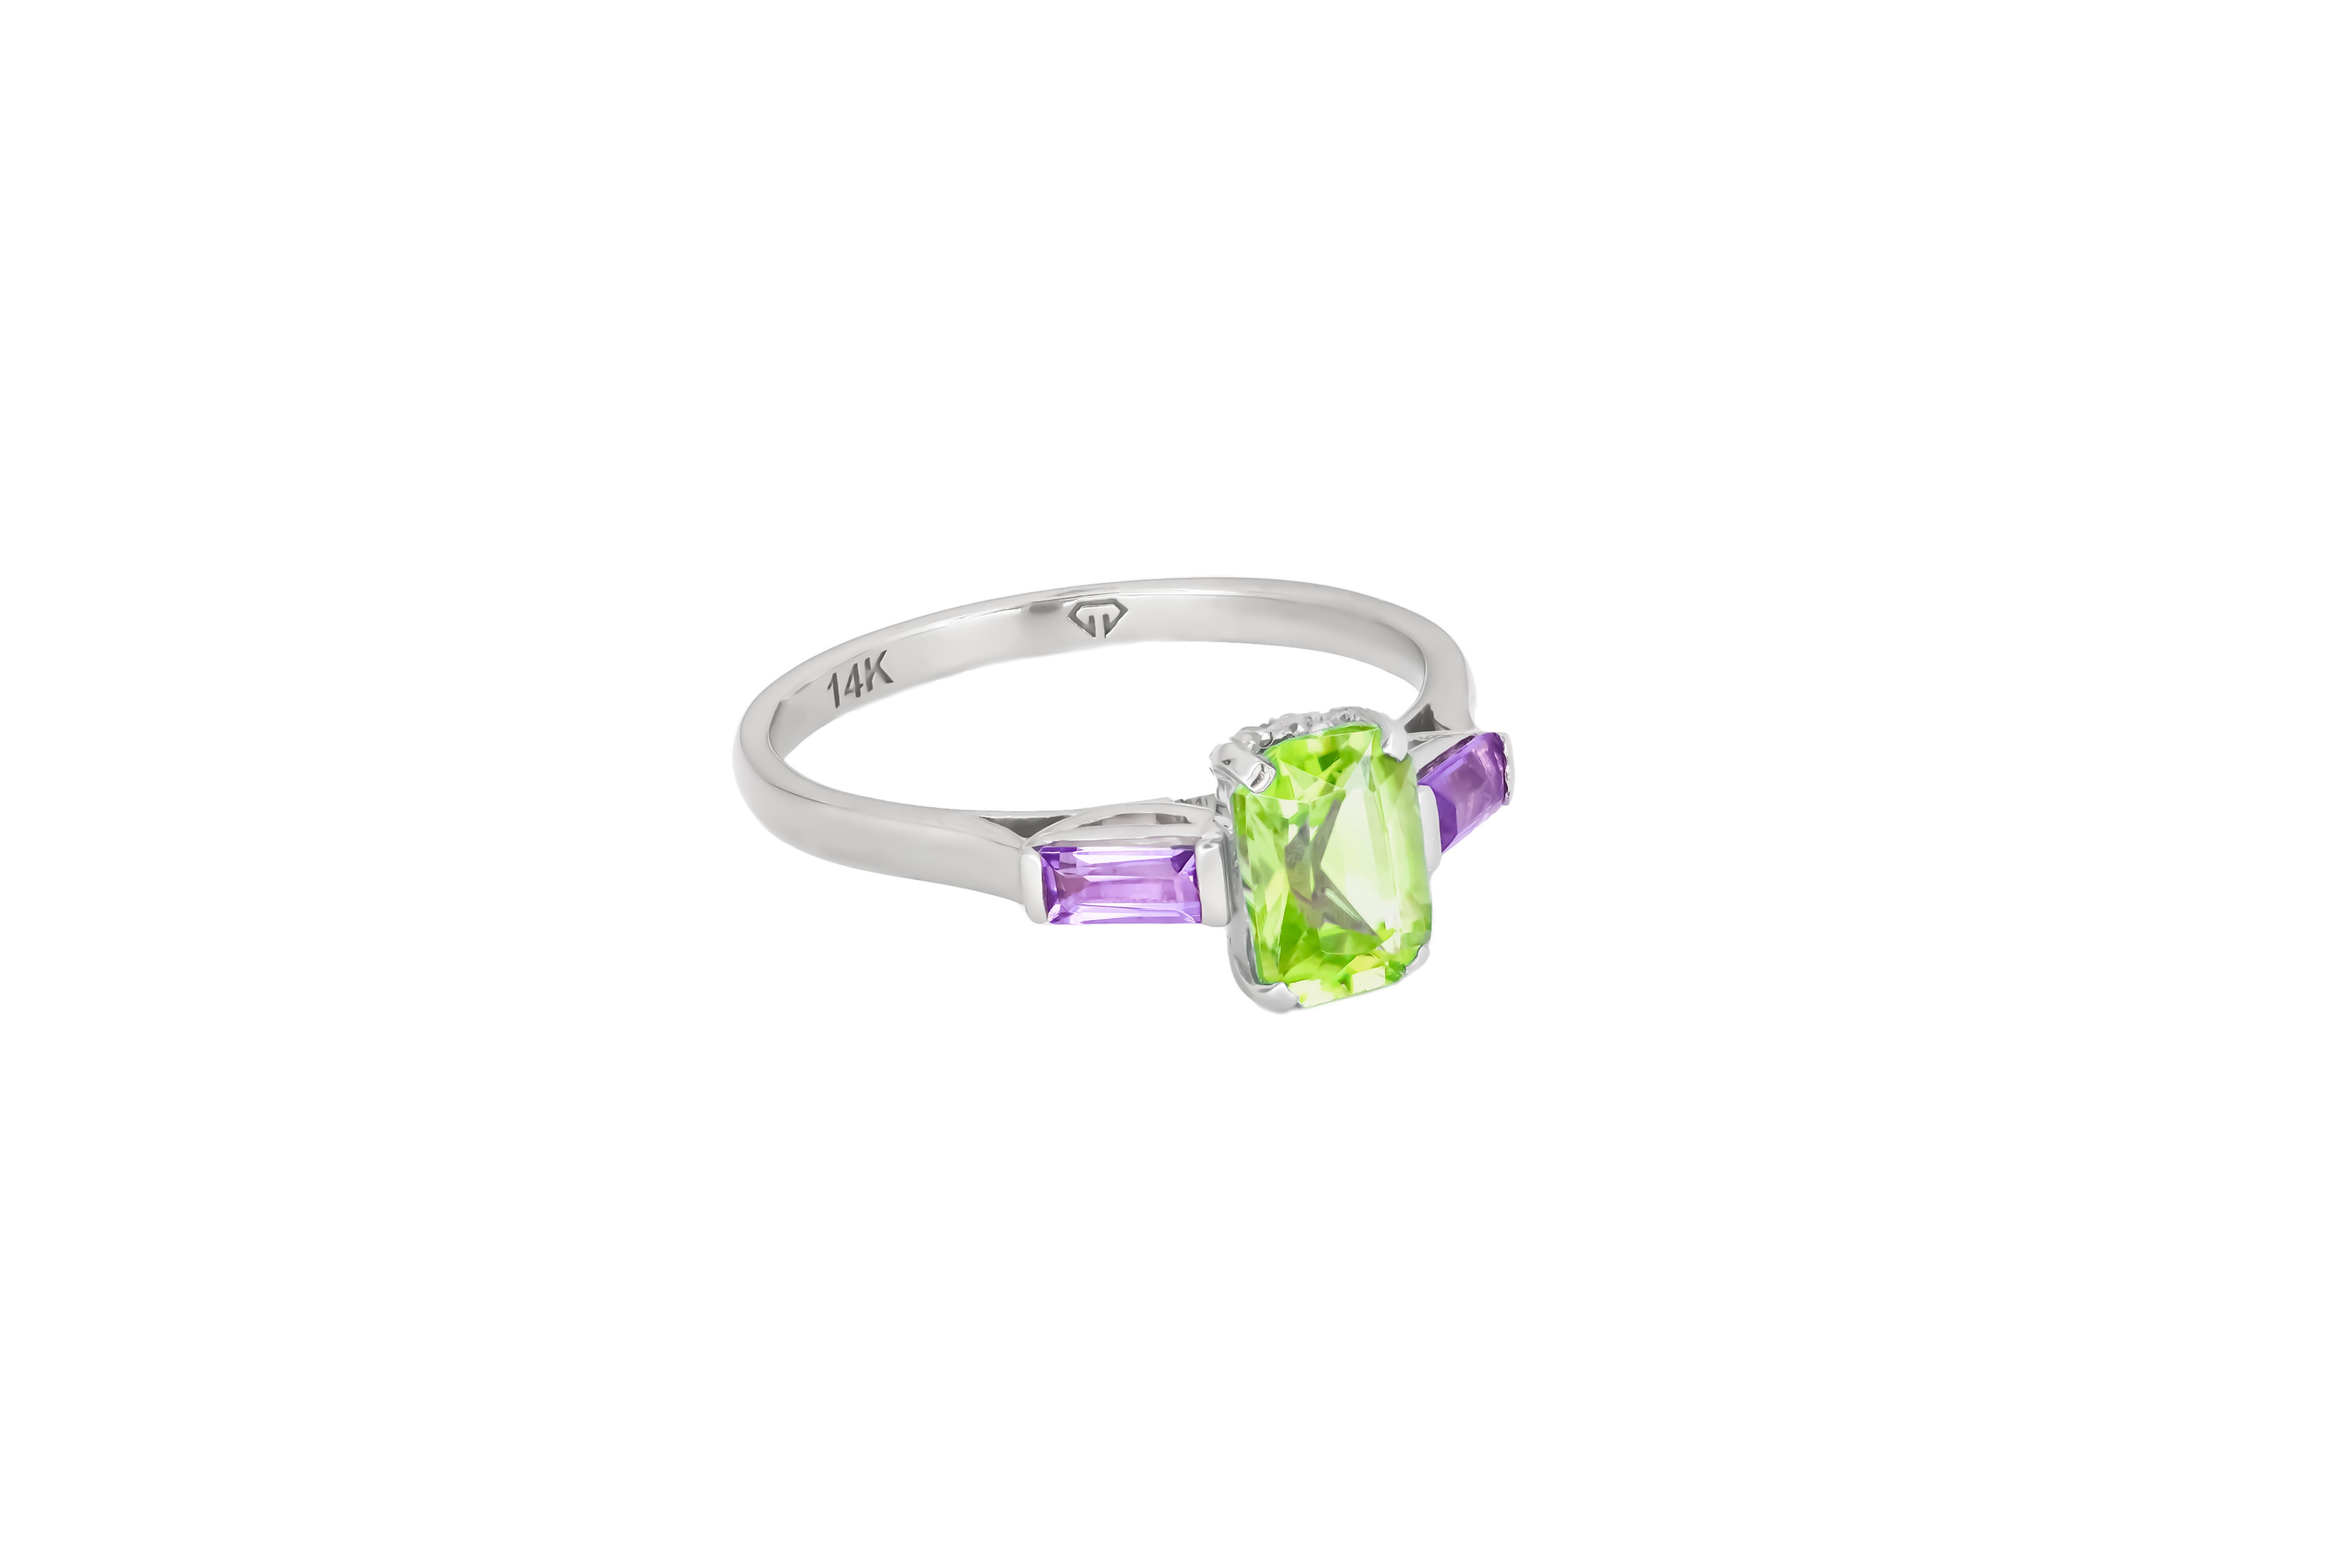 Octagon lab peridot 14k gold ring.  Trilogy Engagement Ring. Apple green lab peridot ring. Casual gold ring. 14k gold lab peridot and amethyst ring. Octagon lab peridot ring.  
 
Metal type: Gold
Metal stamp: 14k Gold
Weight: 2 gr depends from